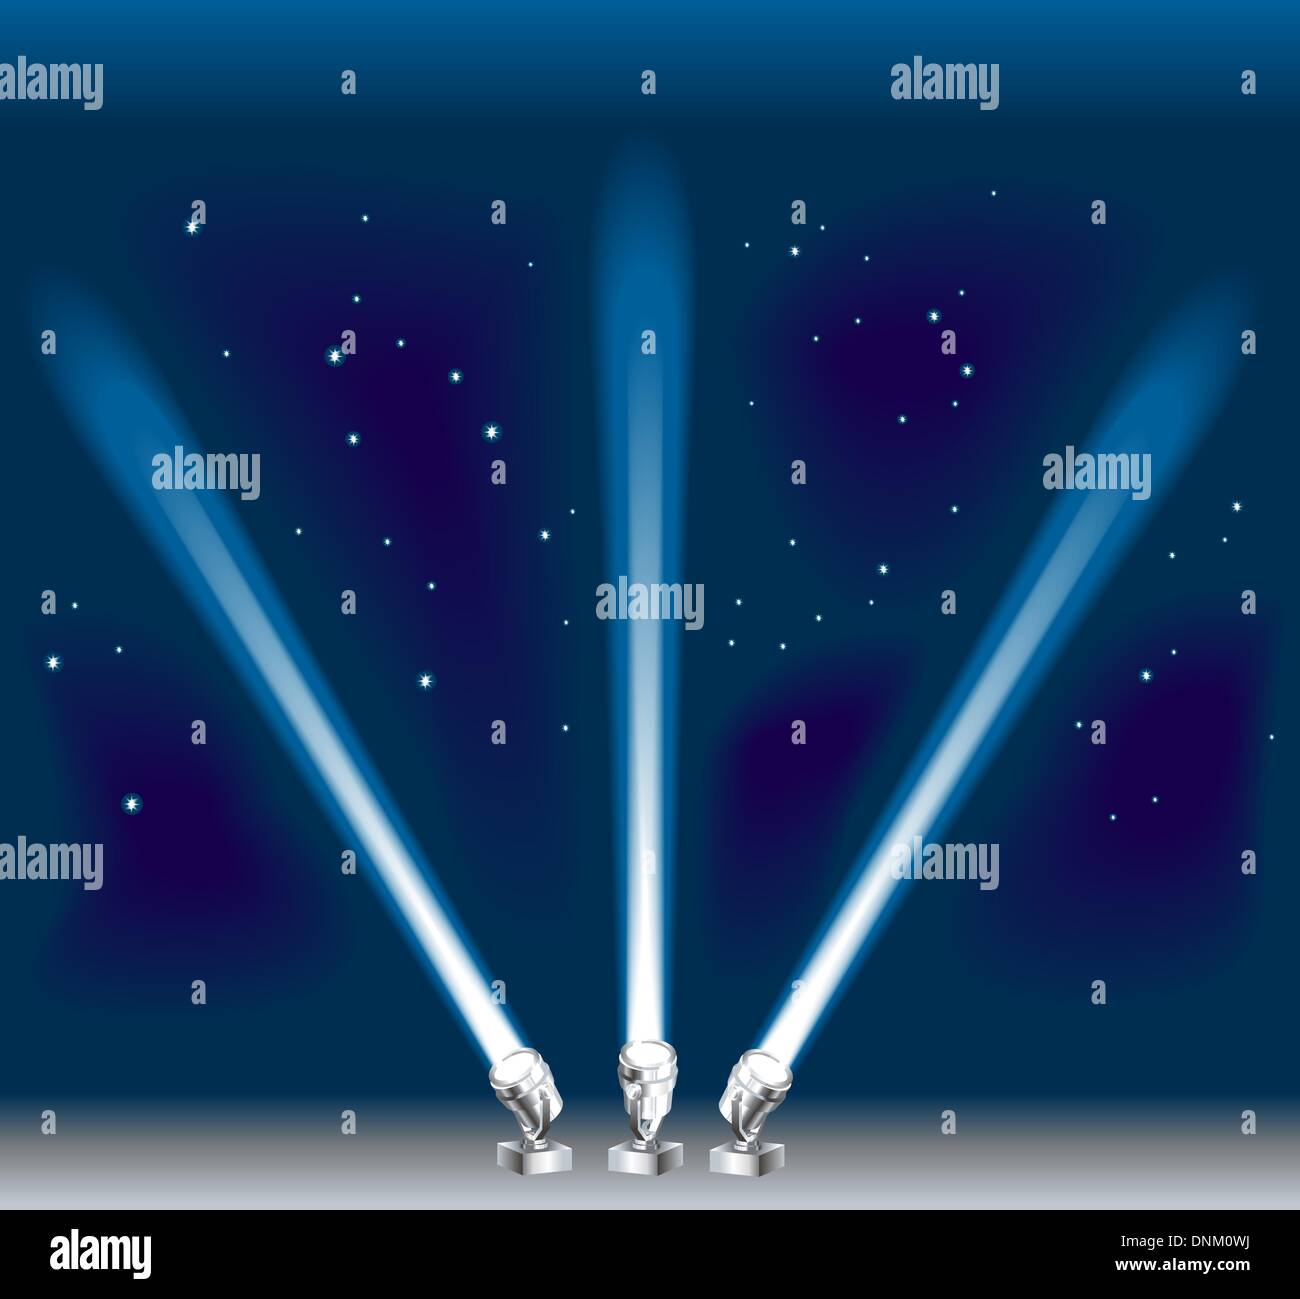 Some search/ spotlights. Shading by blends, no meshes used. Stock Vector